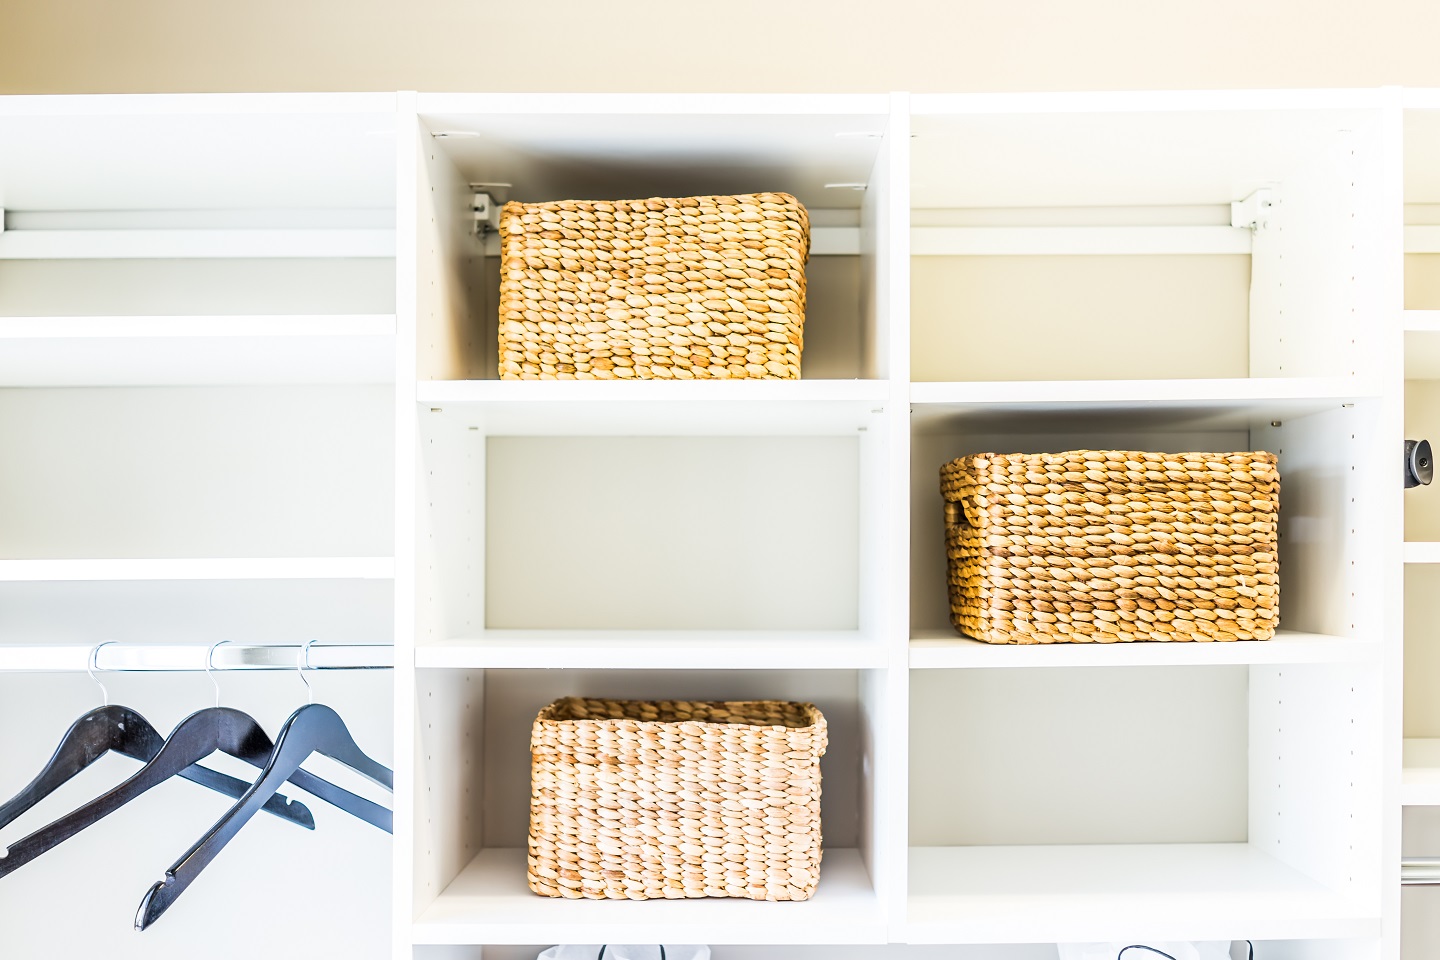 Use baskets for extra storage